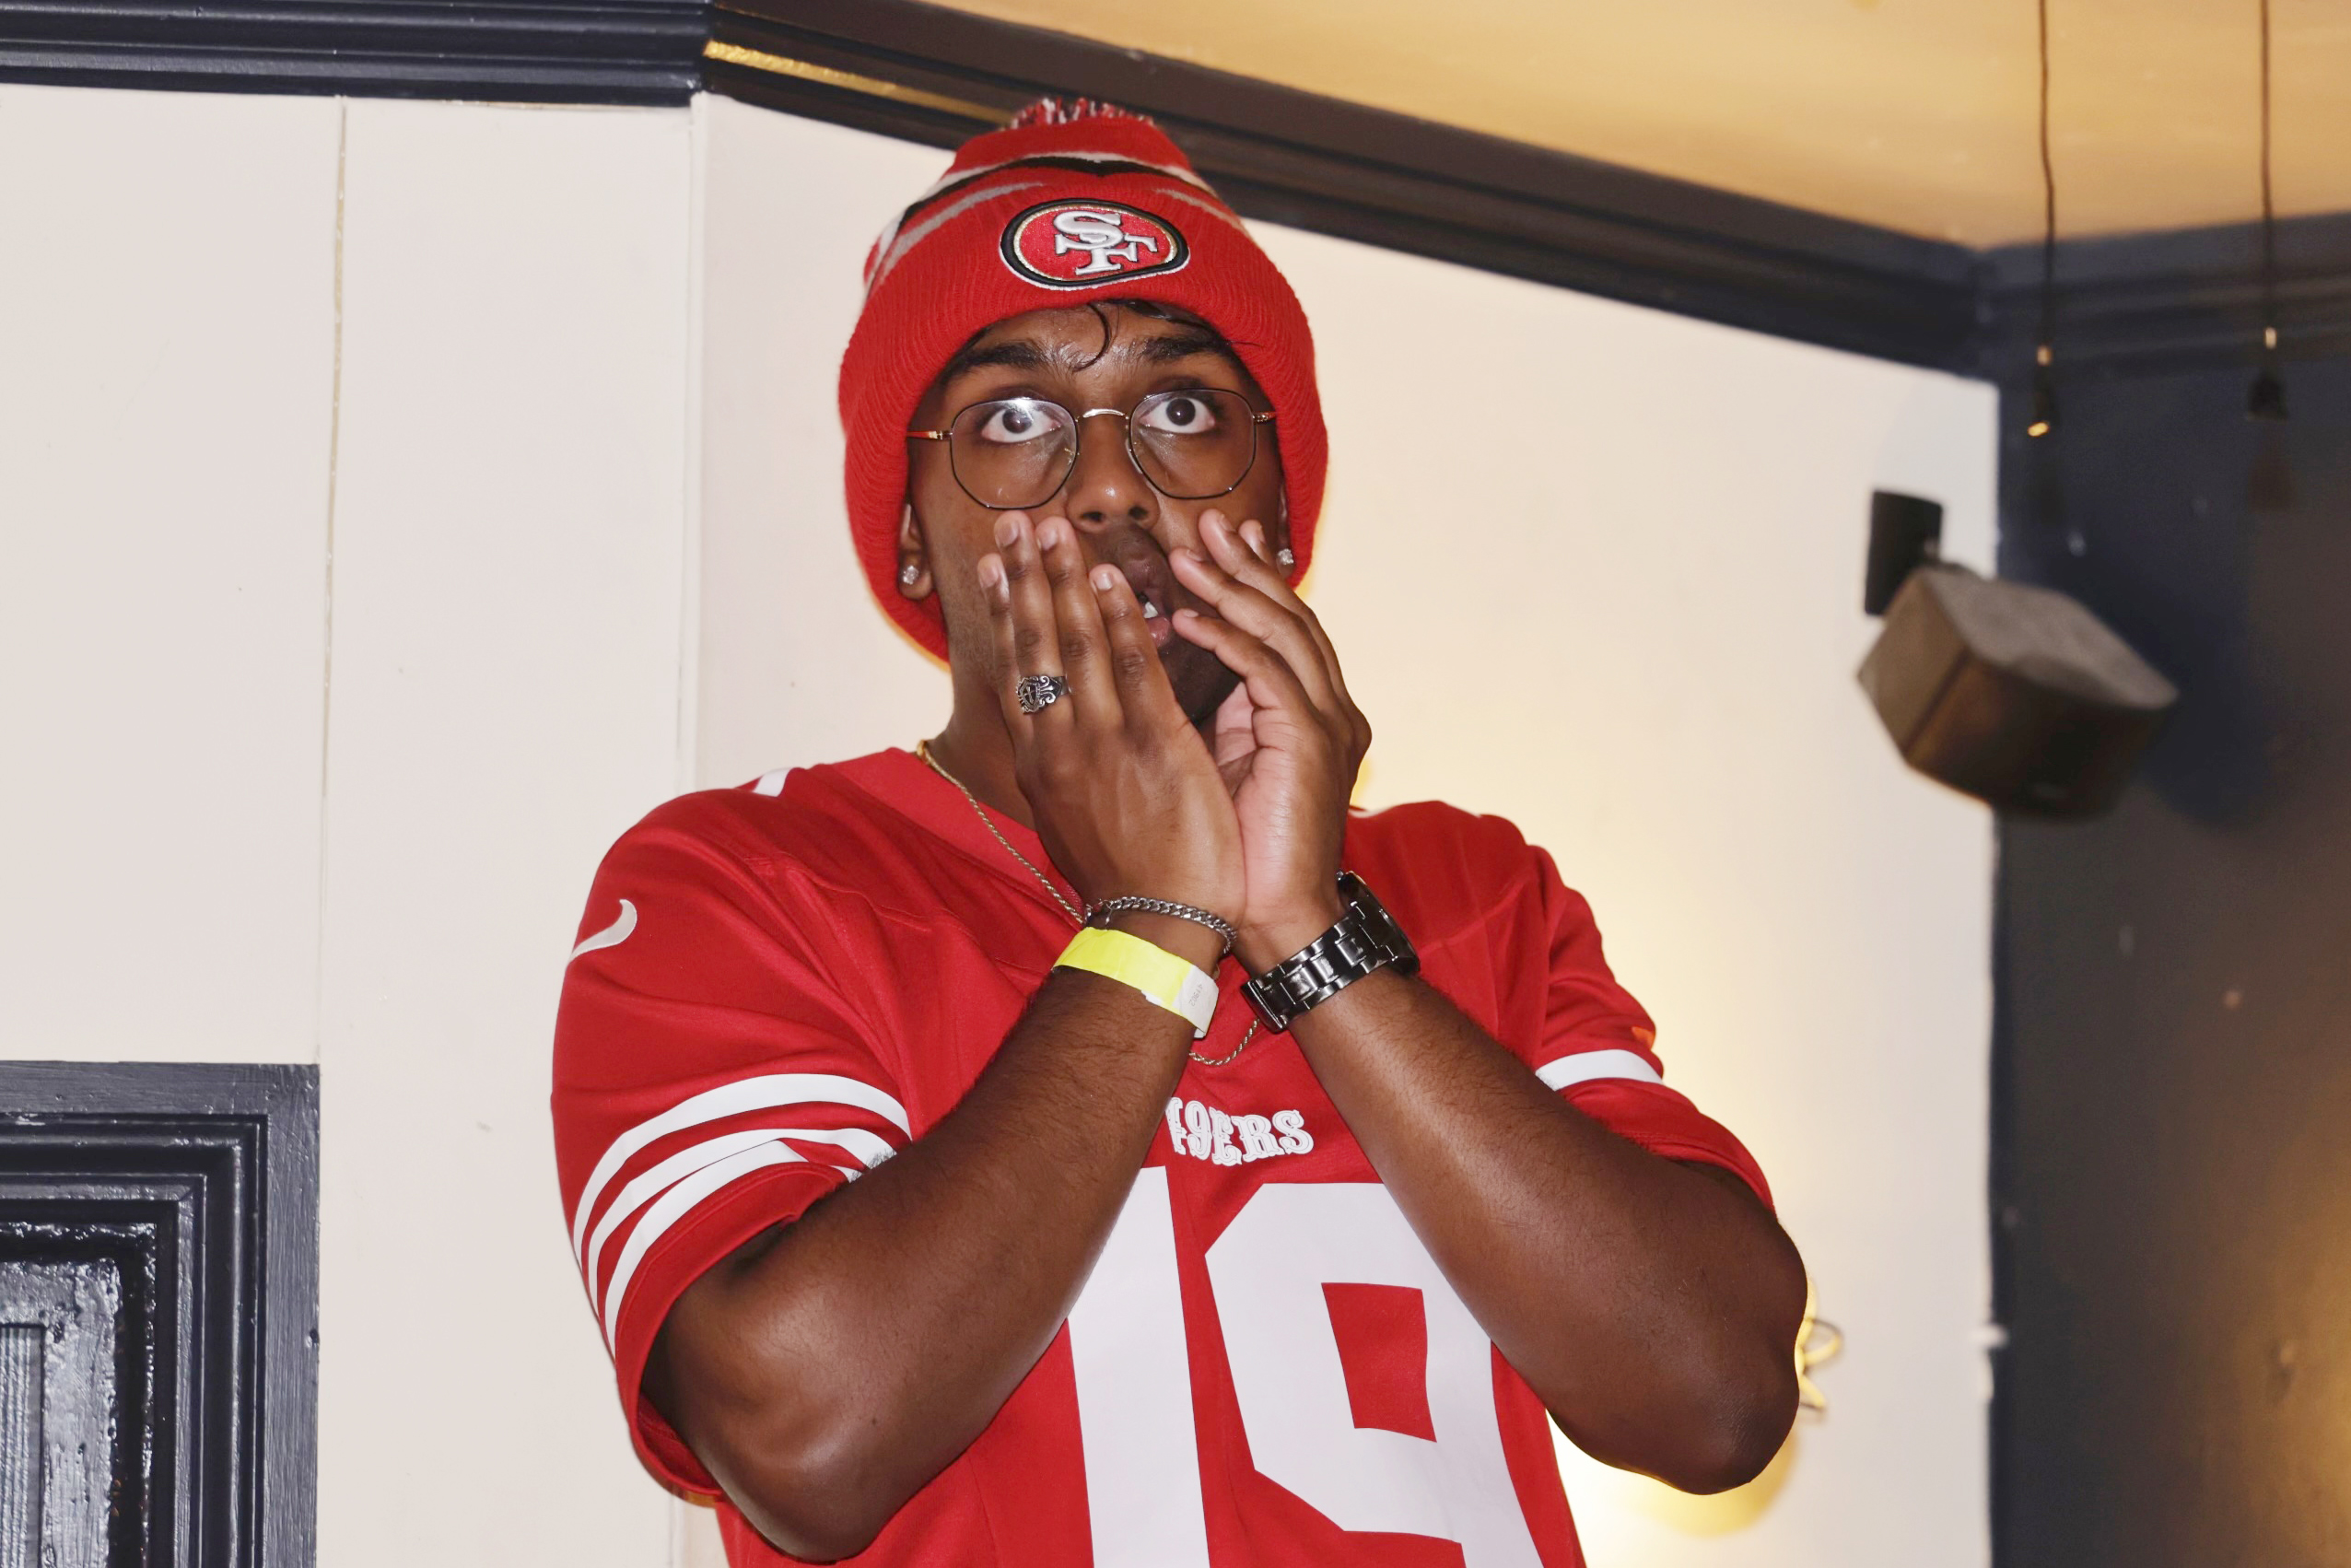 49ers fan holds hands to face while watching football game